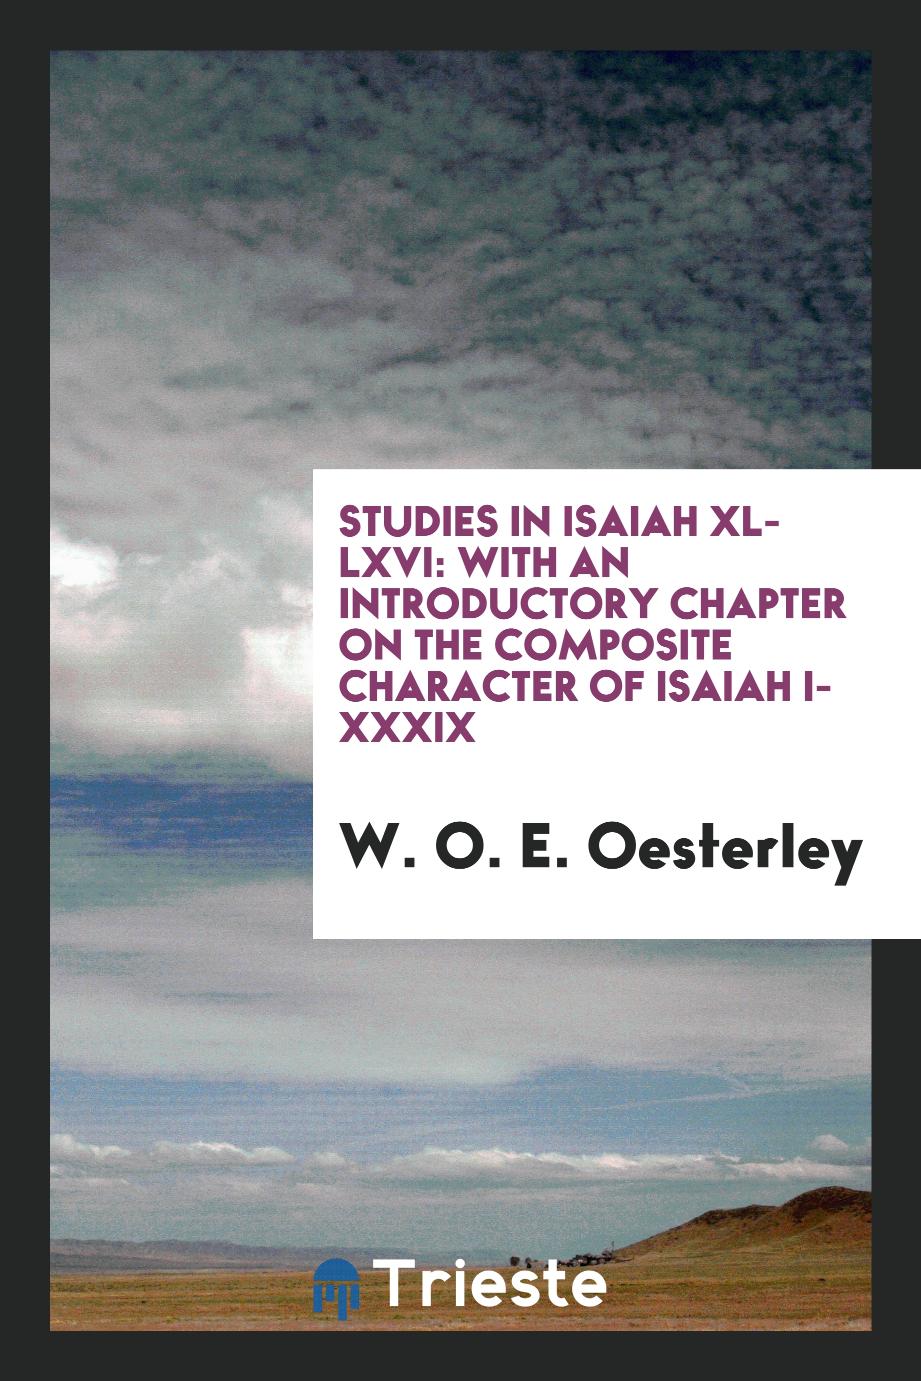 Studies in Isaiah XL-LXVI: with an introductory chapter on the composite character of Isaiah I-XXXIX